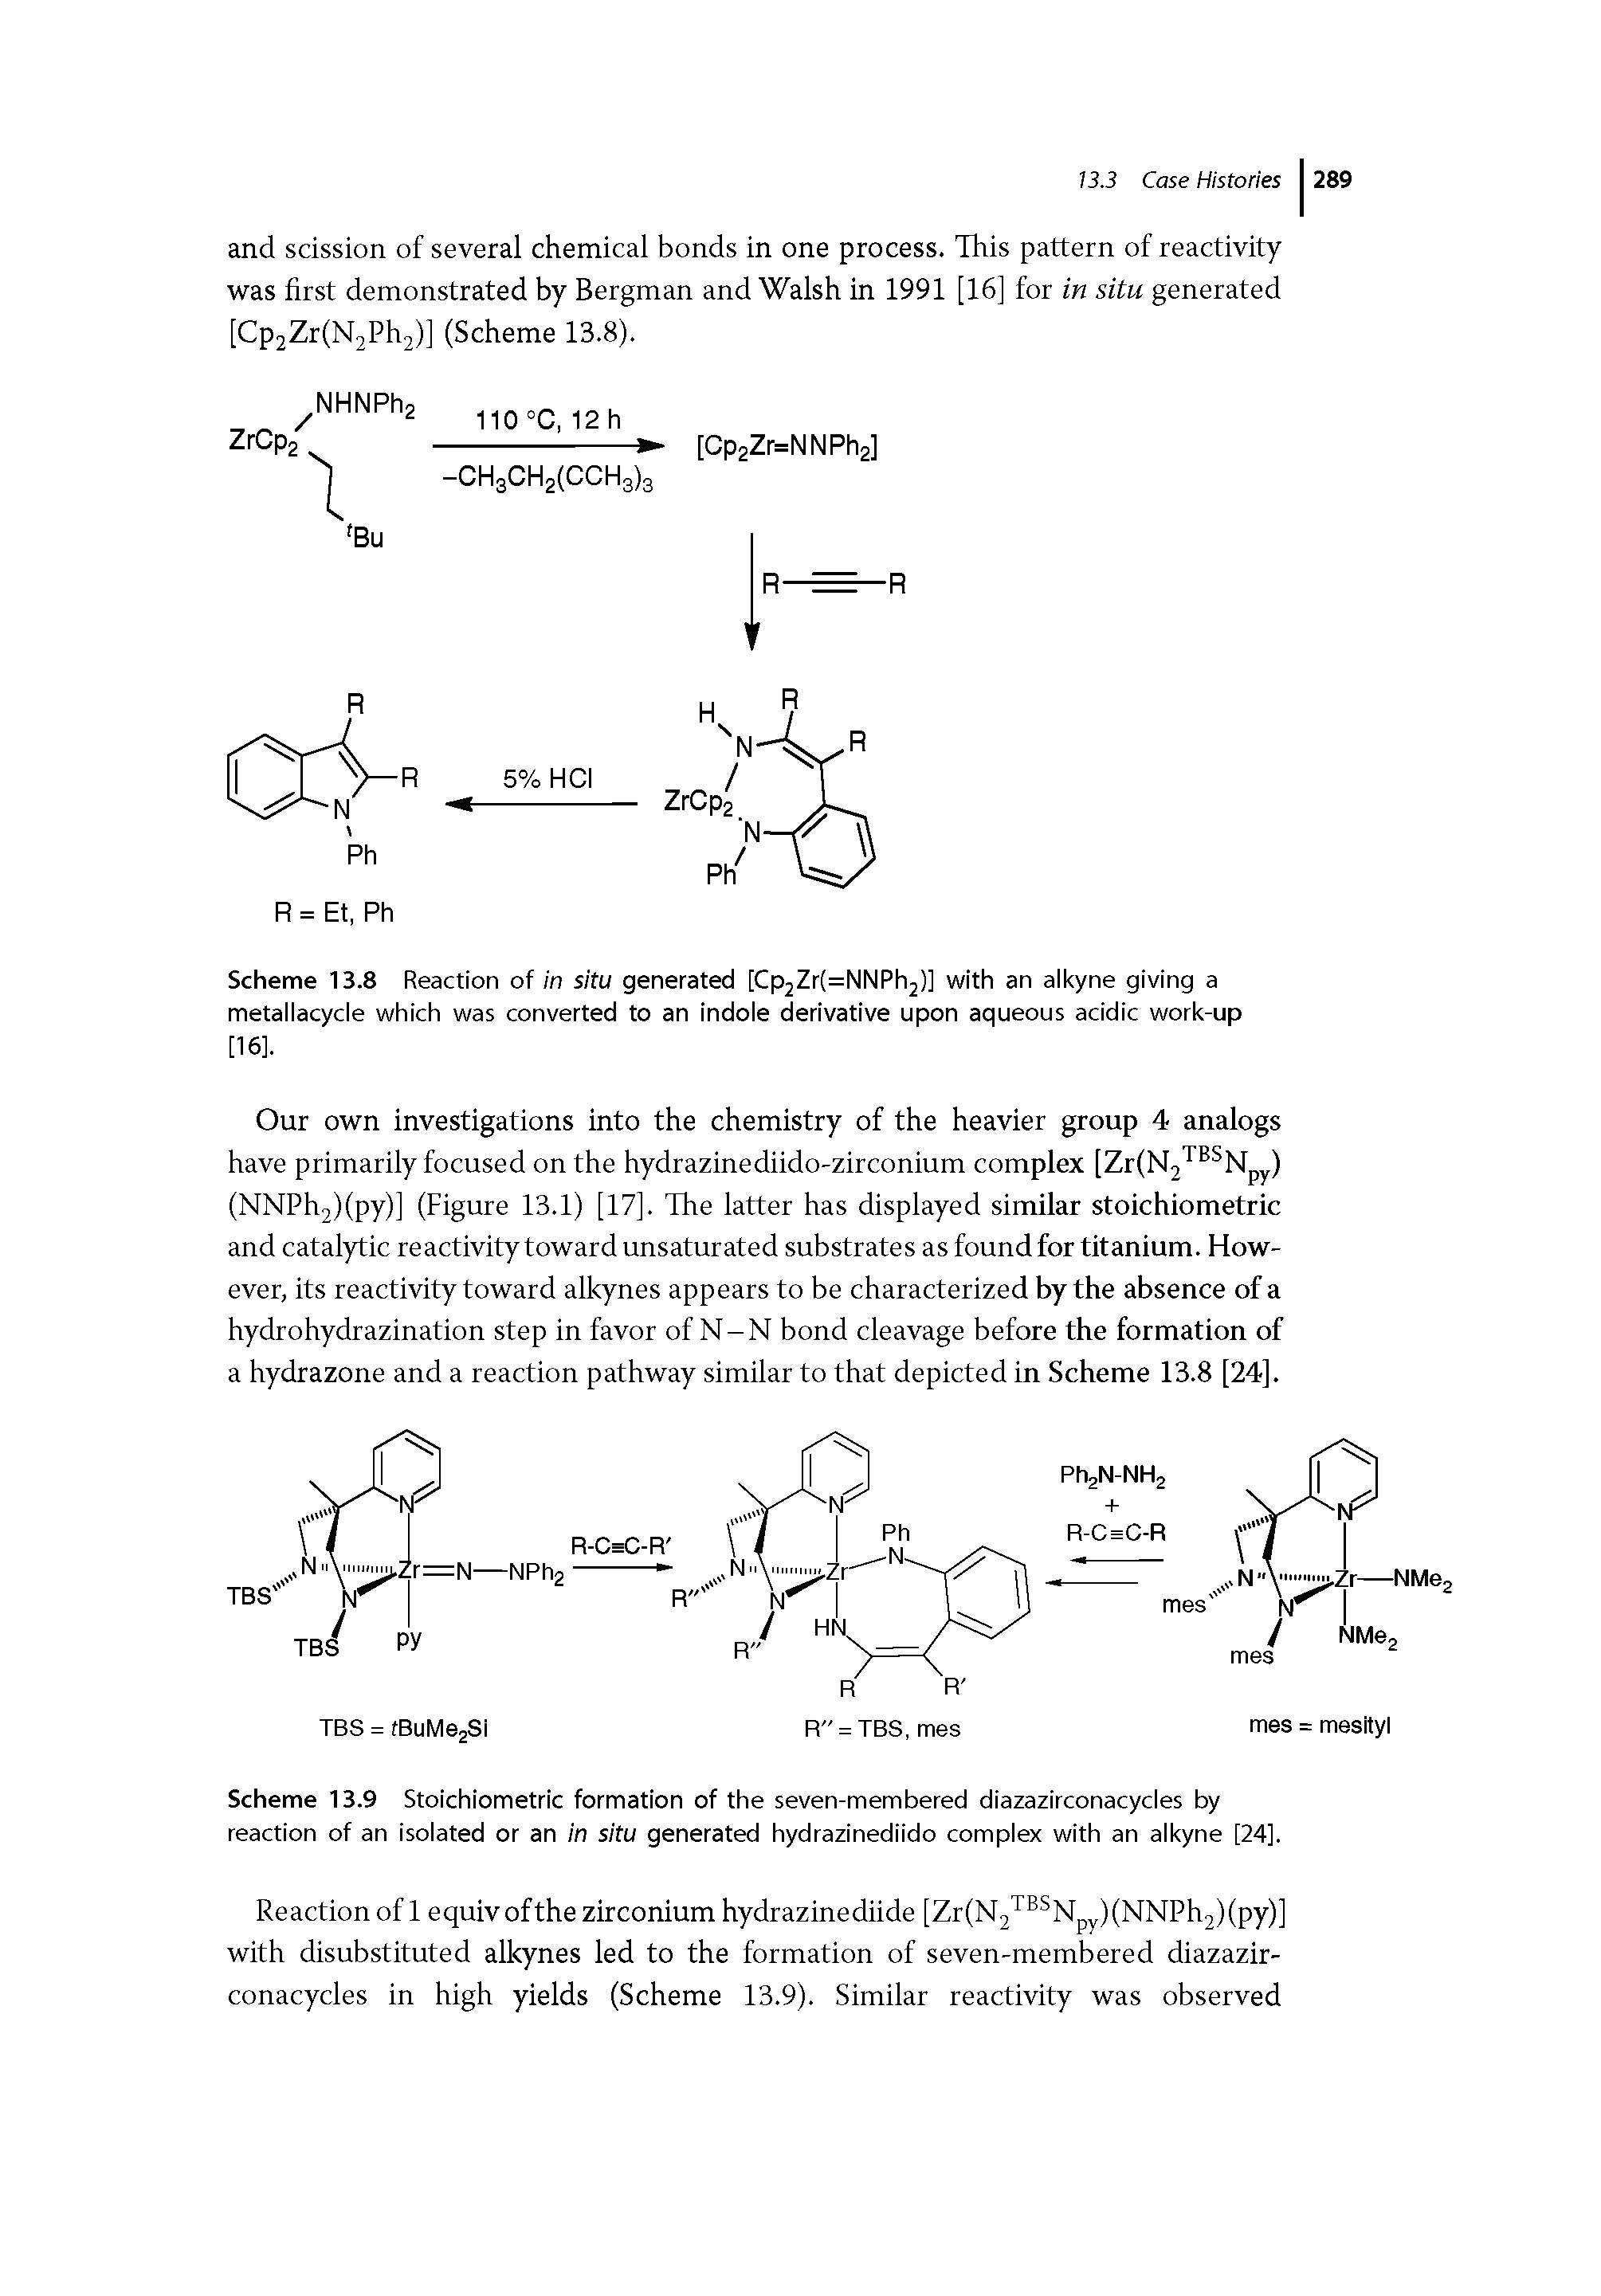 Scheme 13.8 Reaction of in situ generated [Cp2Zr(=NNPh2)] with an alkyne giving a metaiiacycie which was converted to an indoie derivative upon aqueous acidic work-up [16].